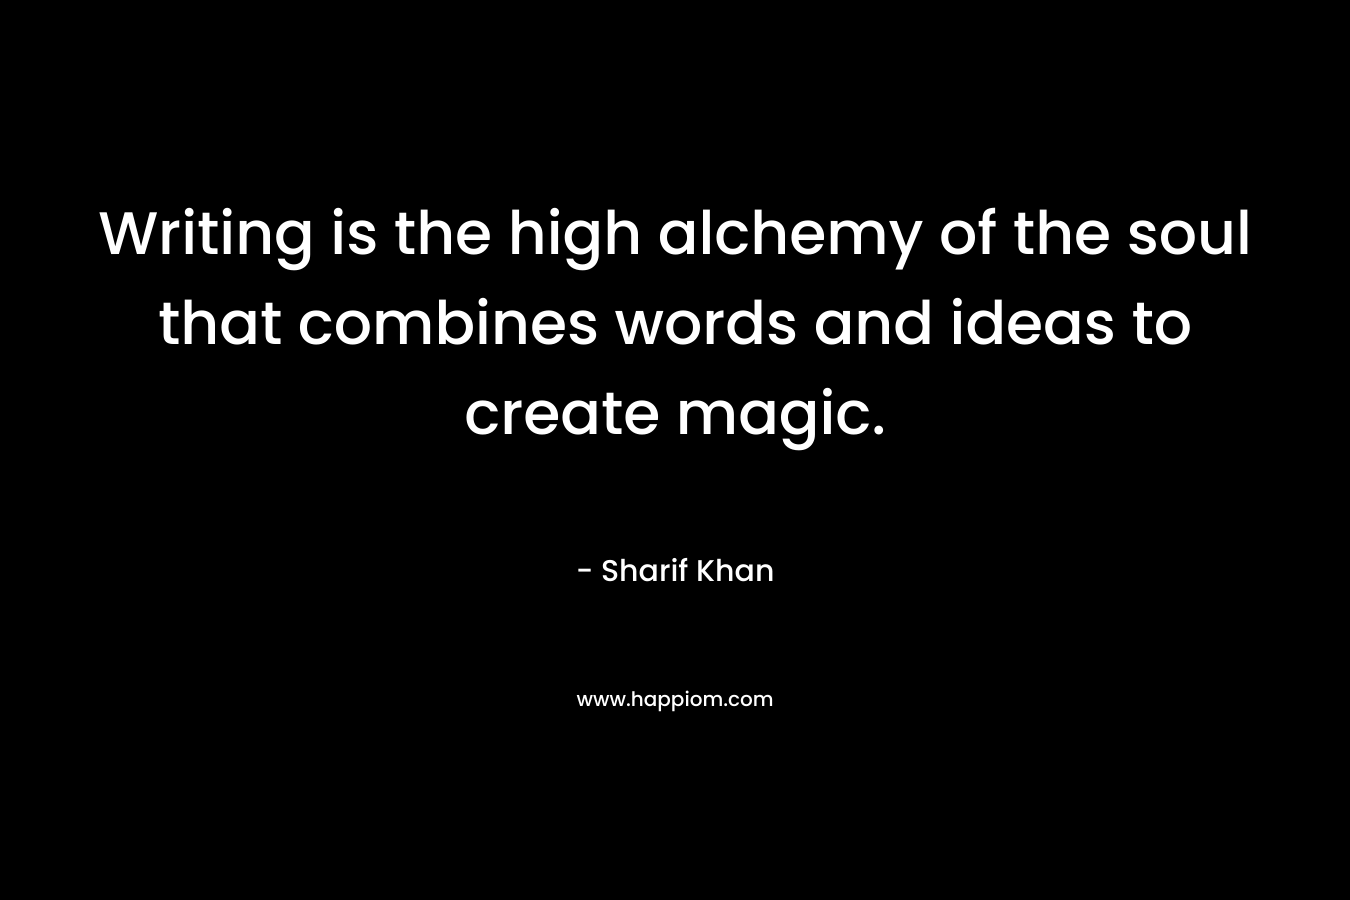 Writing is the high alchemy of the soul that combines words and ideas to create magic. – Sharif Khan